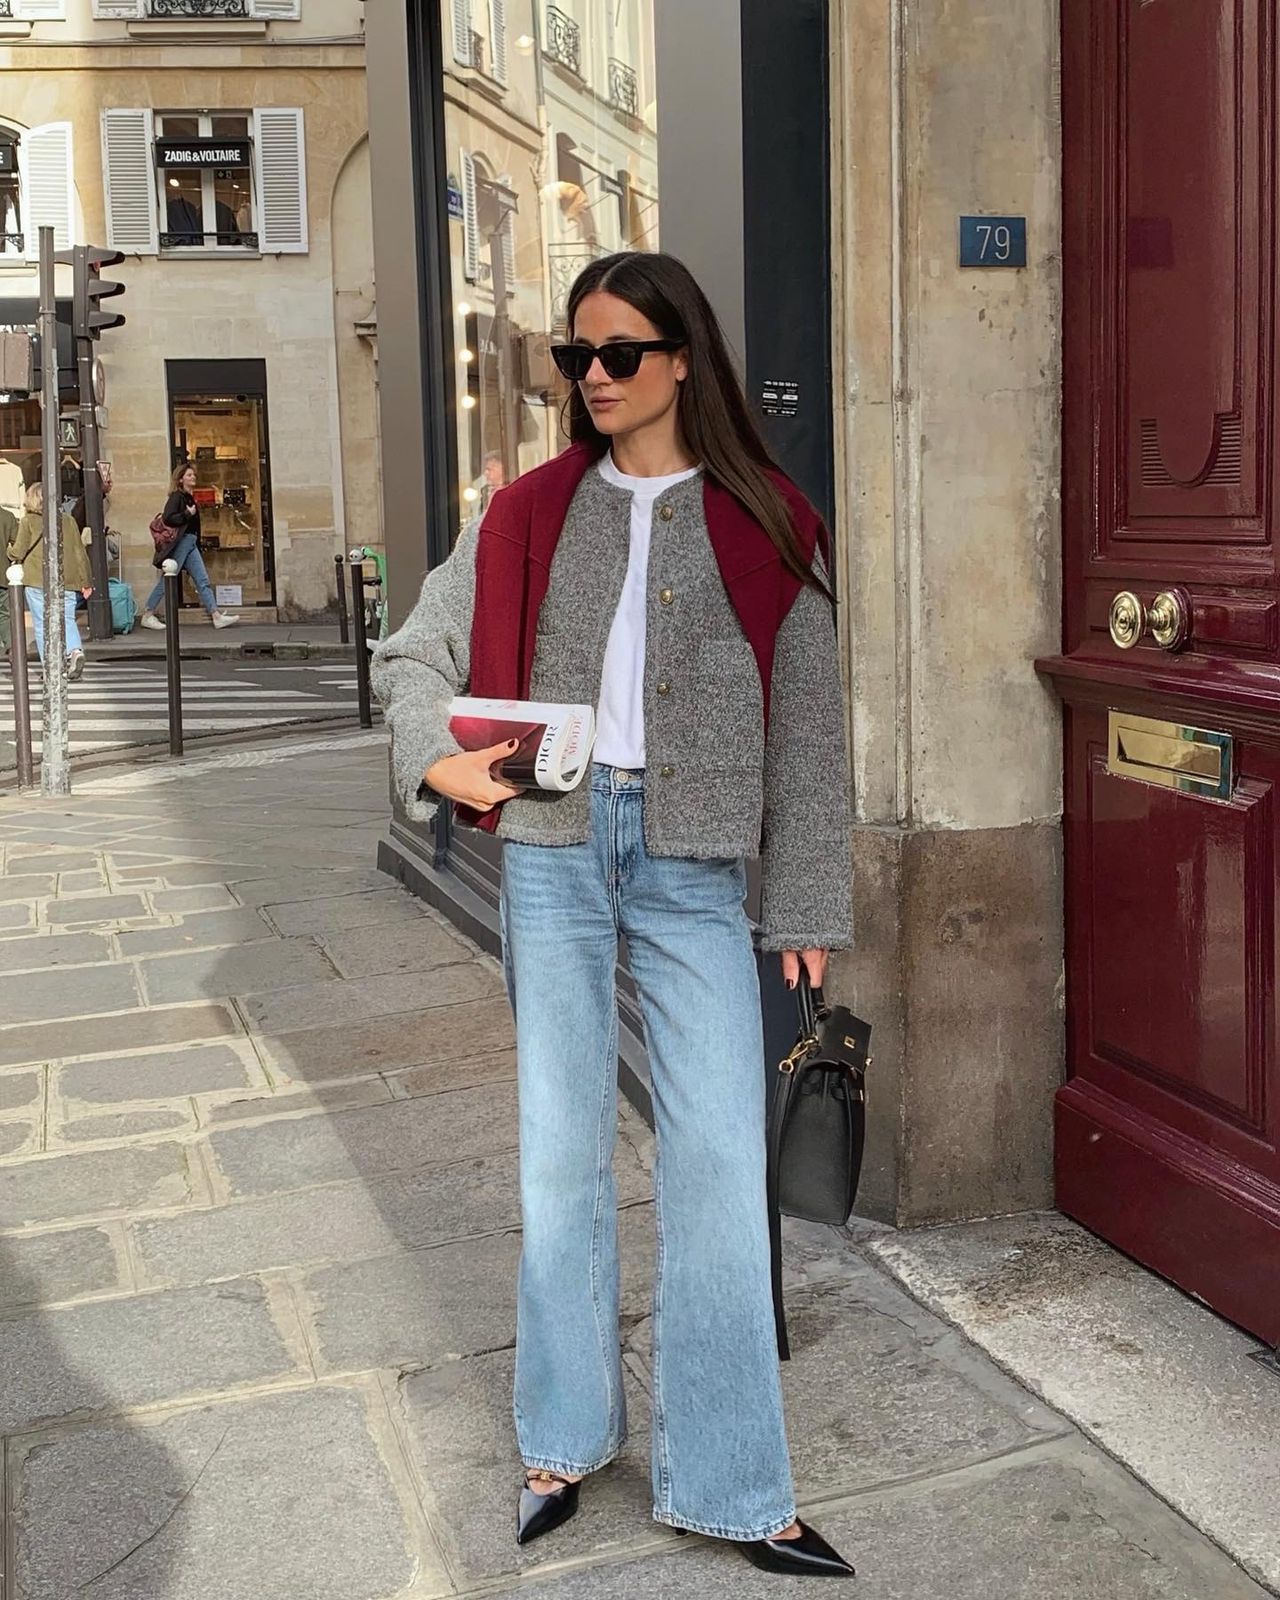 French Women and Their Chic Grandmas Love This Jacket Trend | Who What Wear